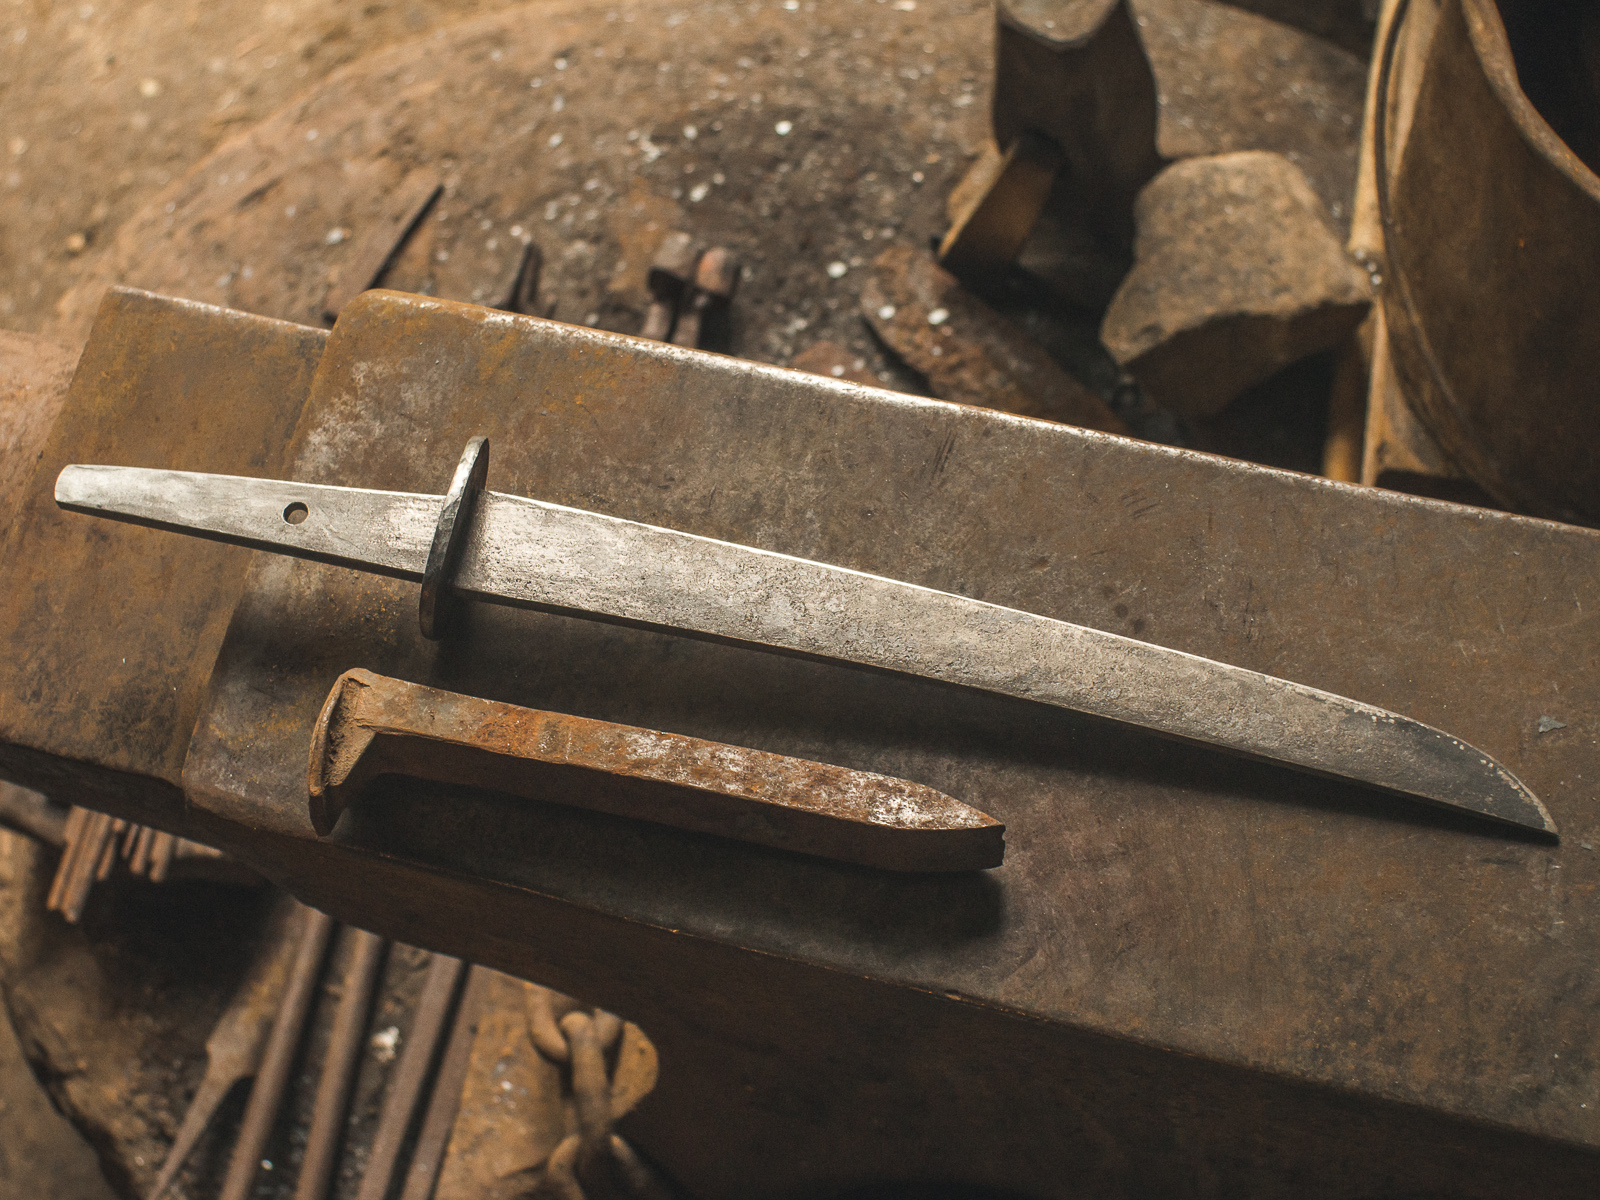 Island Blacksmith: Hand forged tanto letter opener made from a reclaimed railroad spike